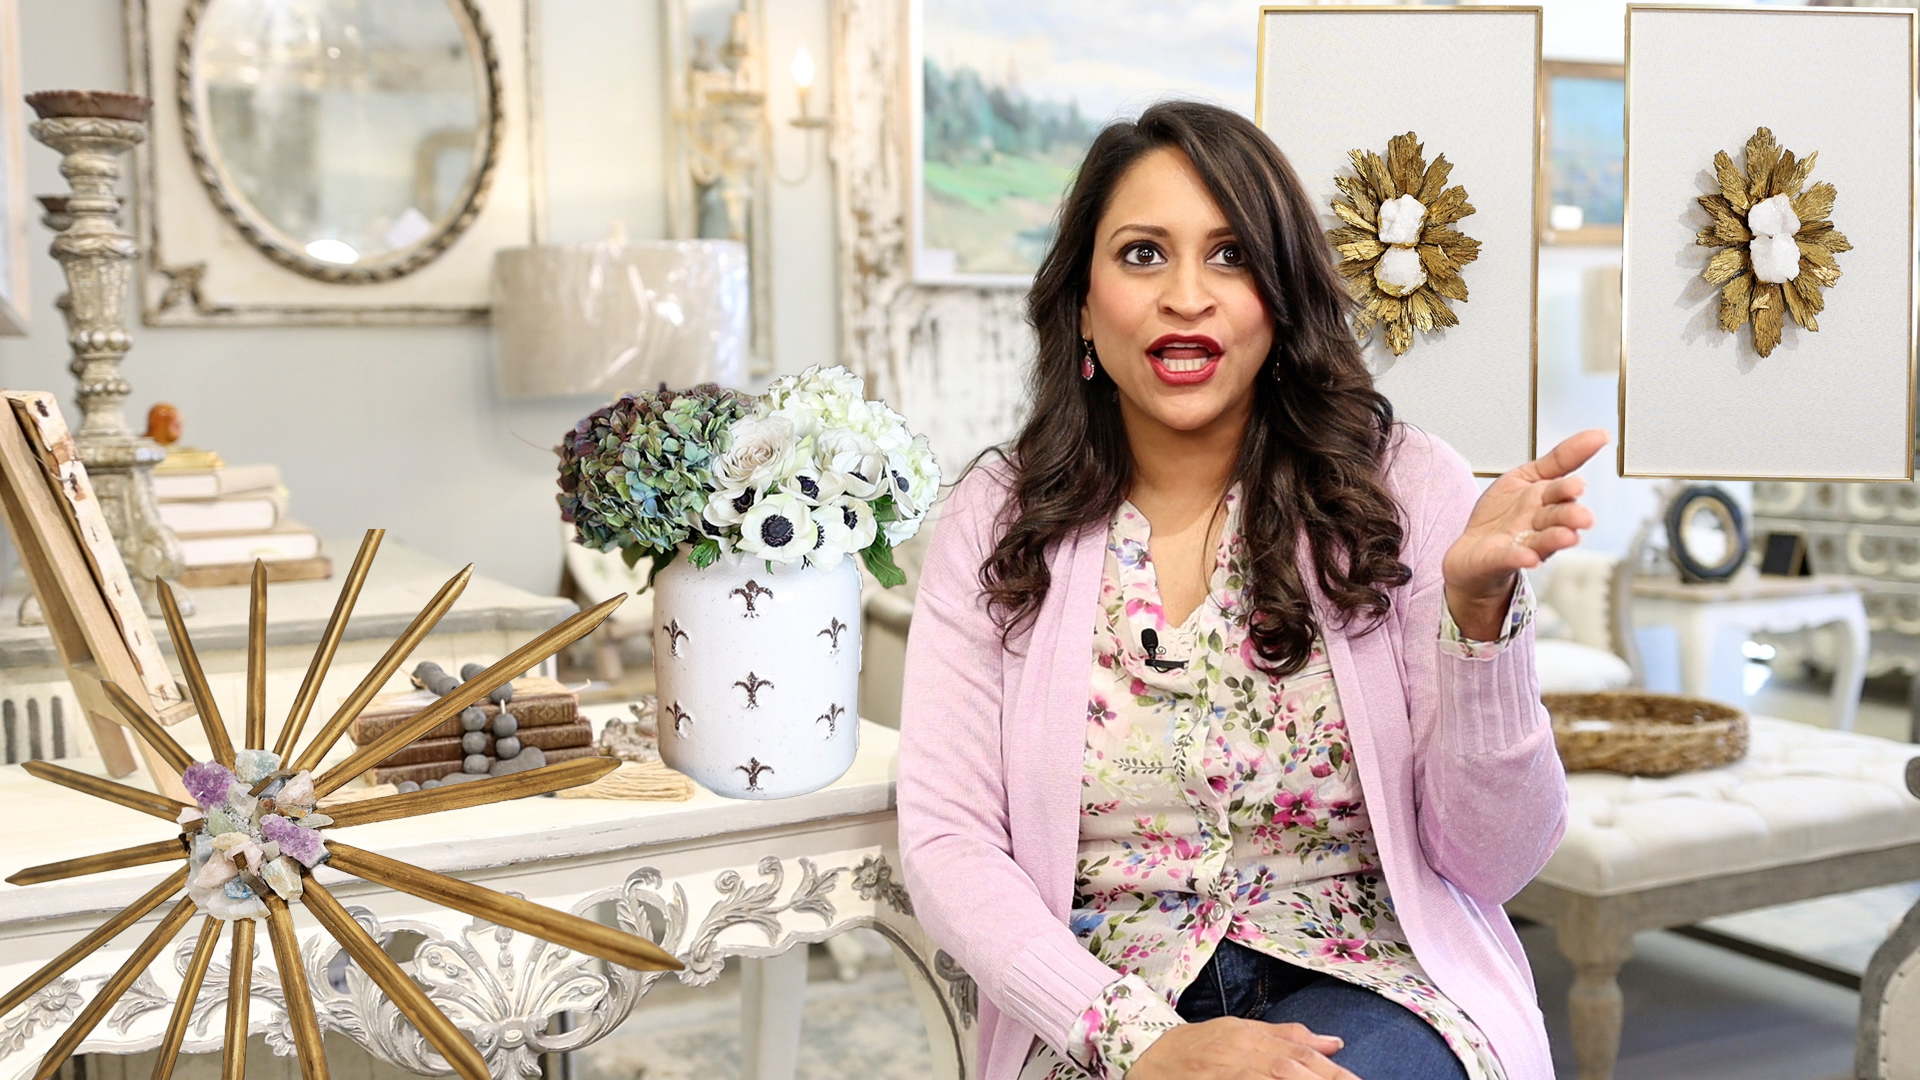 Interior designer, Amitha Verma, shows you the perfect every season French country decor to help you decorate your home between seasons.